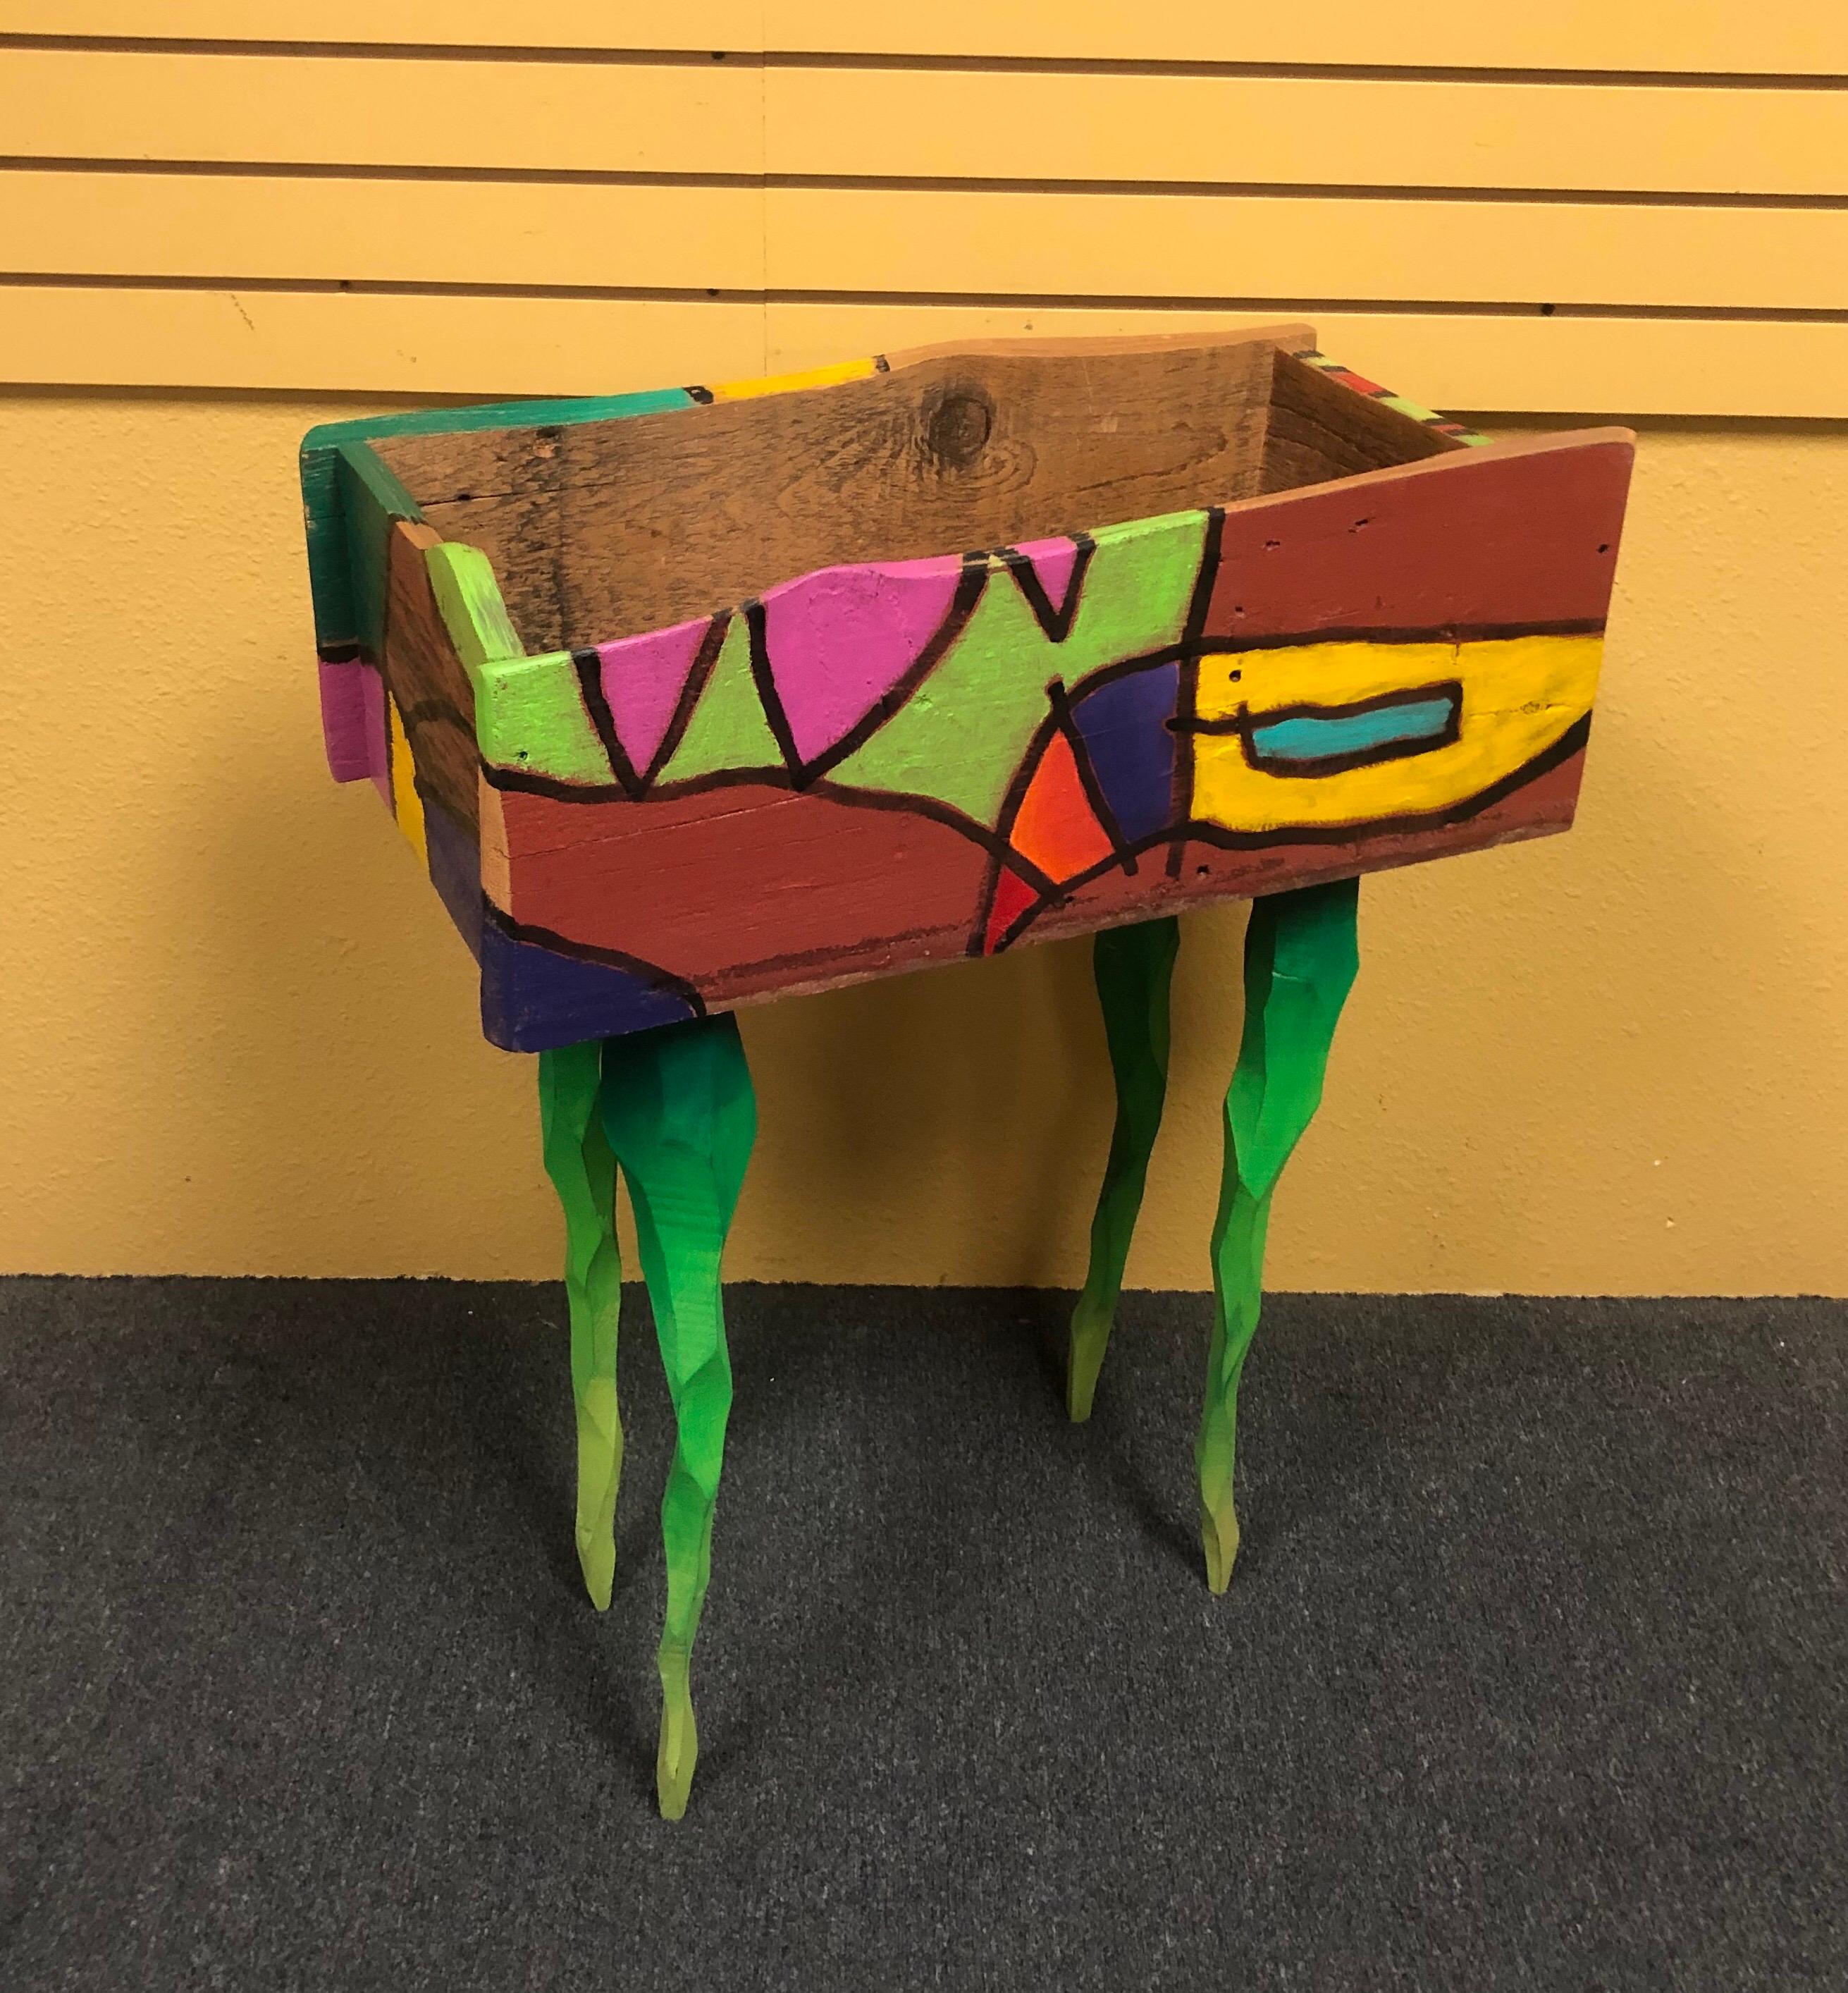 Hand painted barn wood planter by noted artist, author and furniture maker Brian Andreas, circa 2000s. This super colorful large planter is on a stand of green twisted legs and measures: 26.5